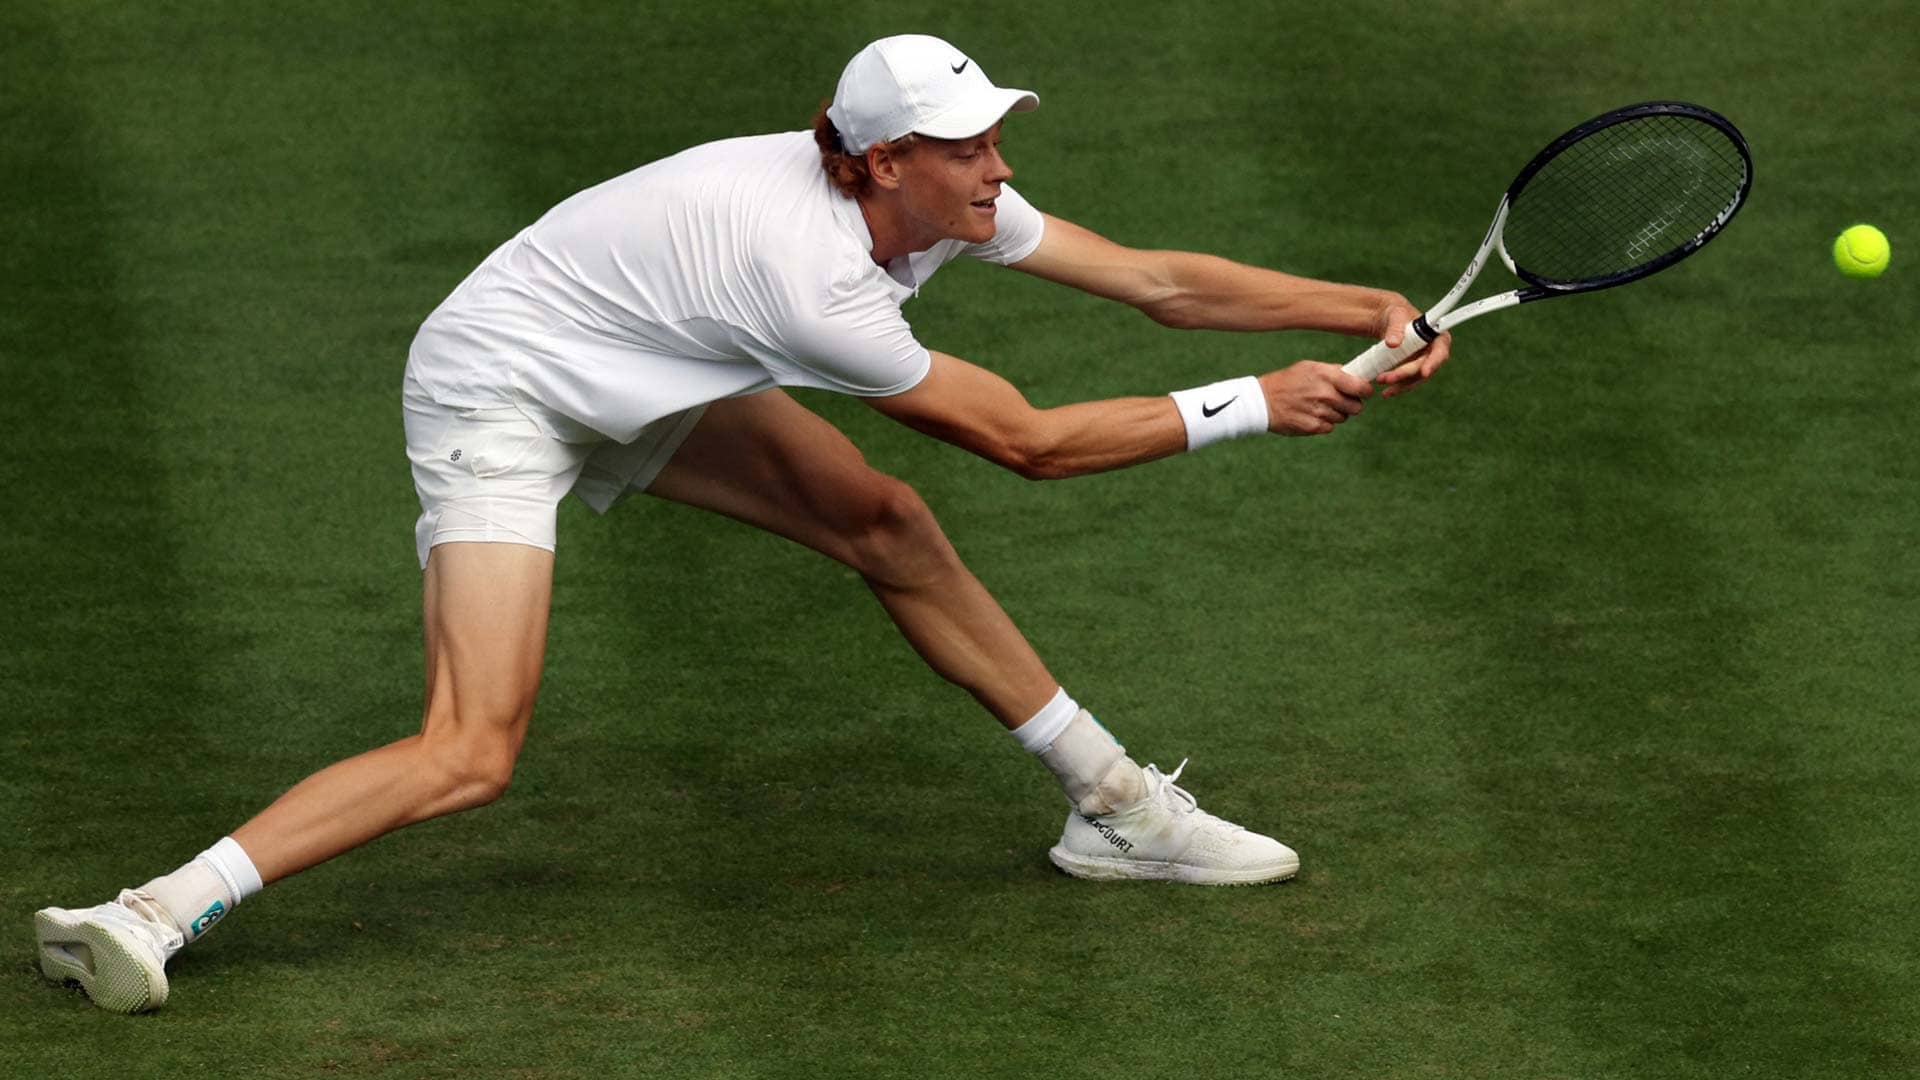 Jannik Sinner is competing in his third Wimbledon and 15th Grand Slam overall.